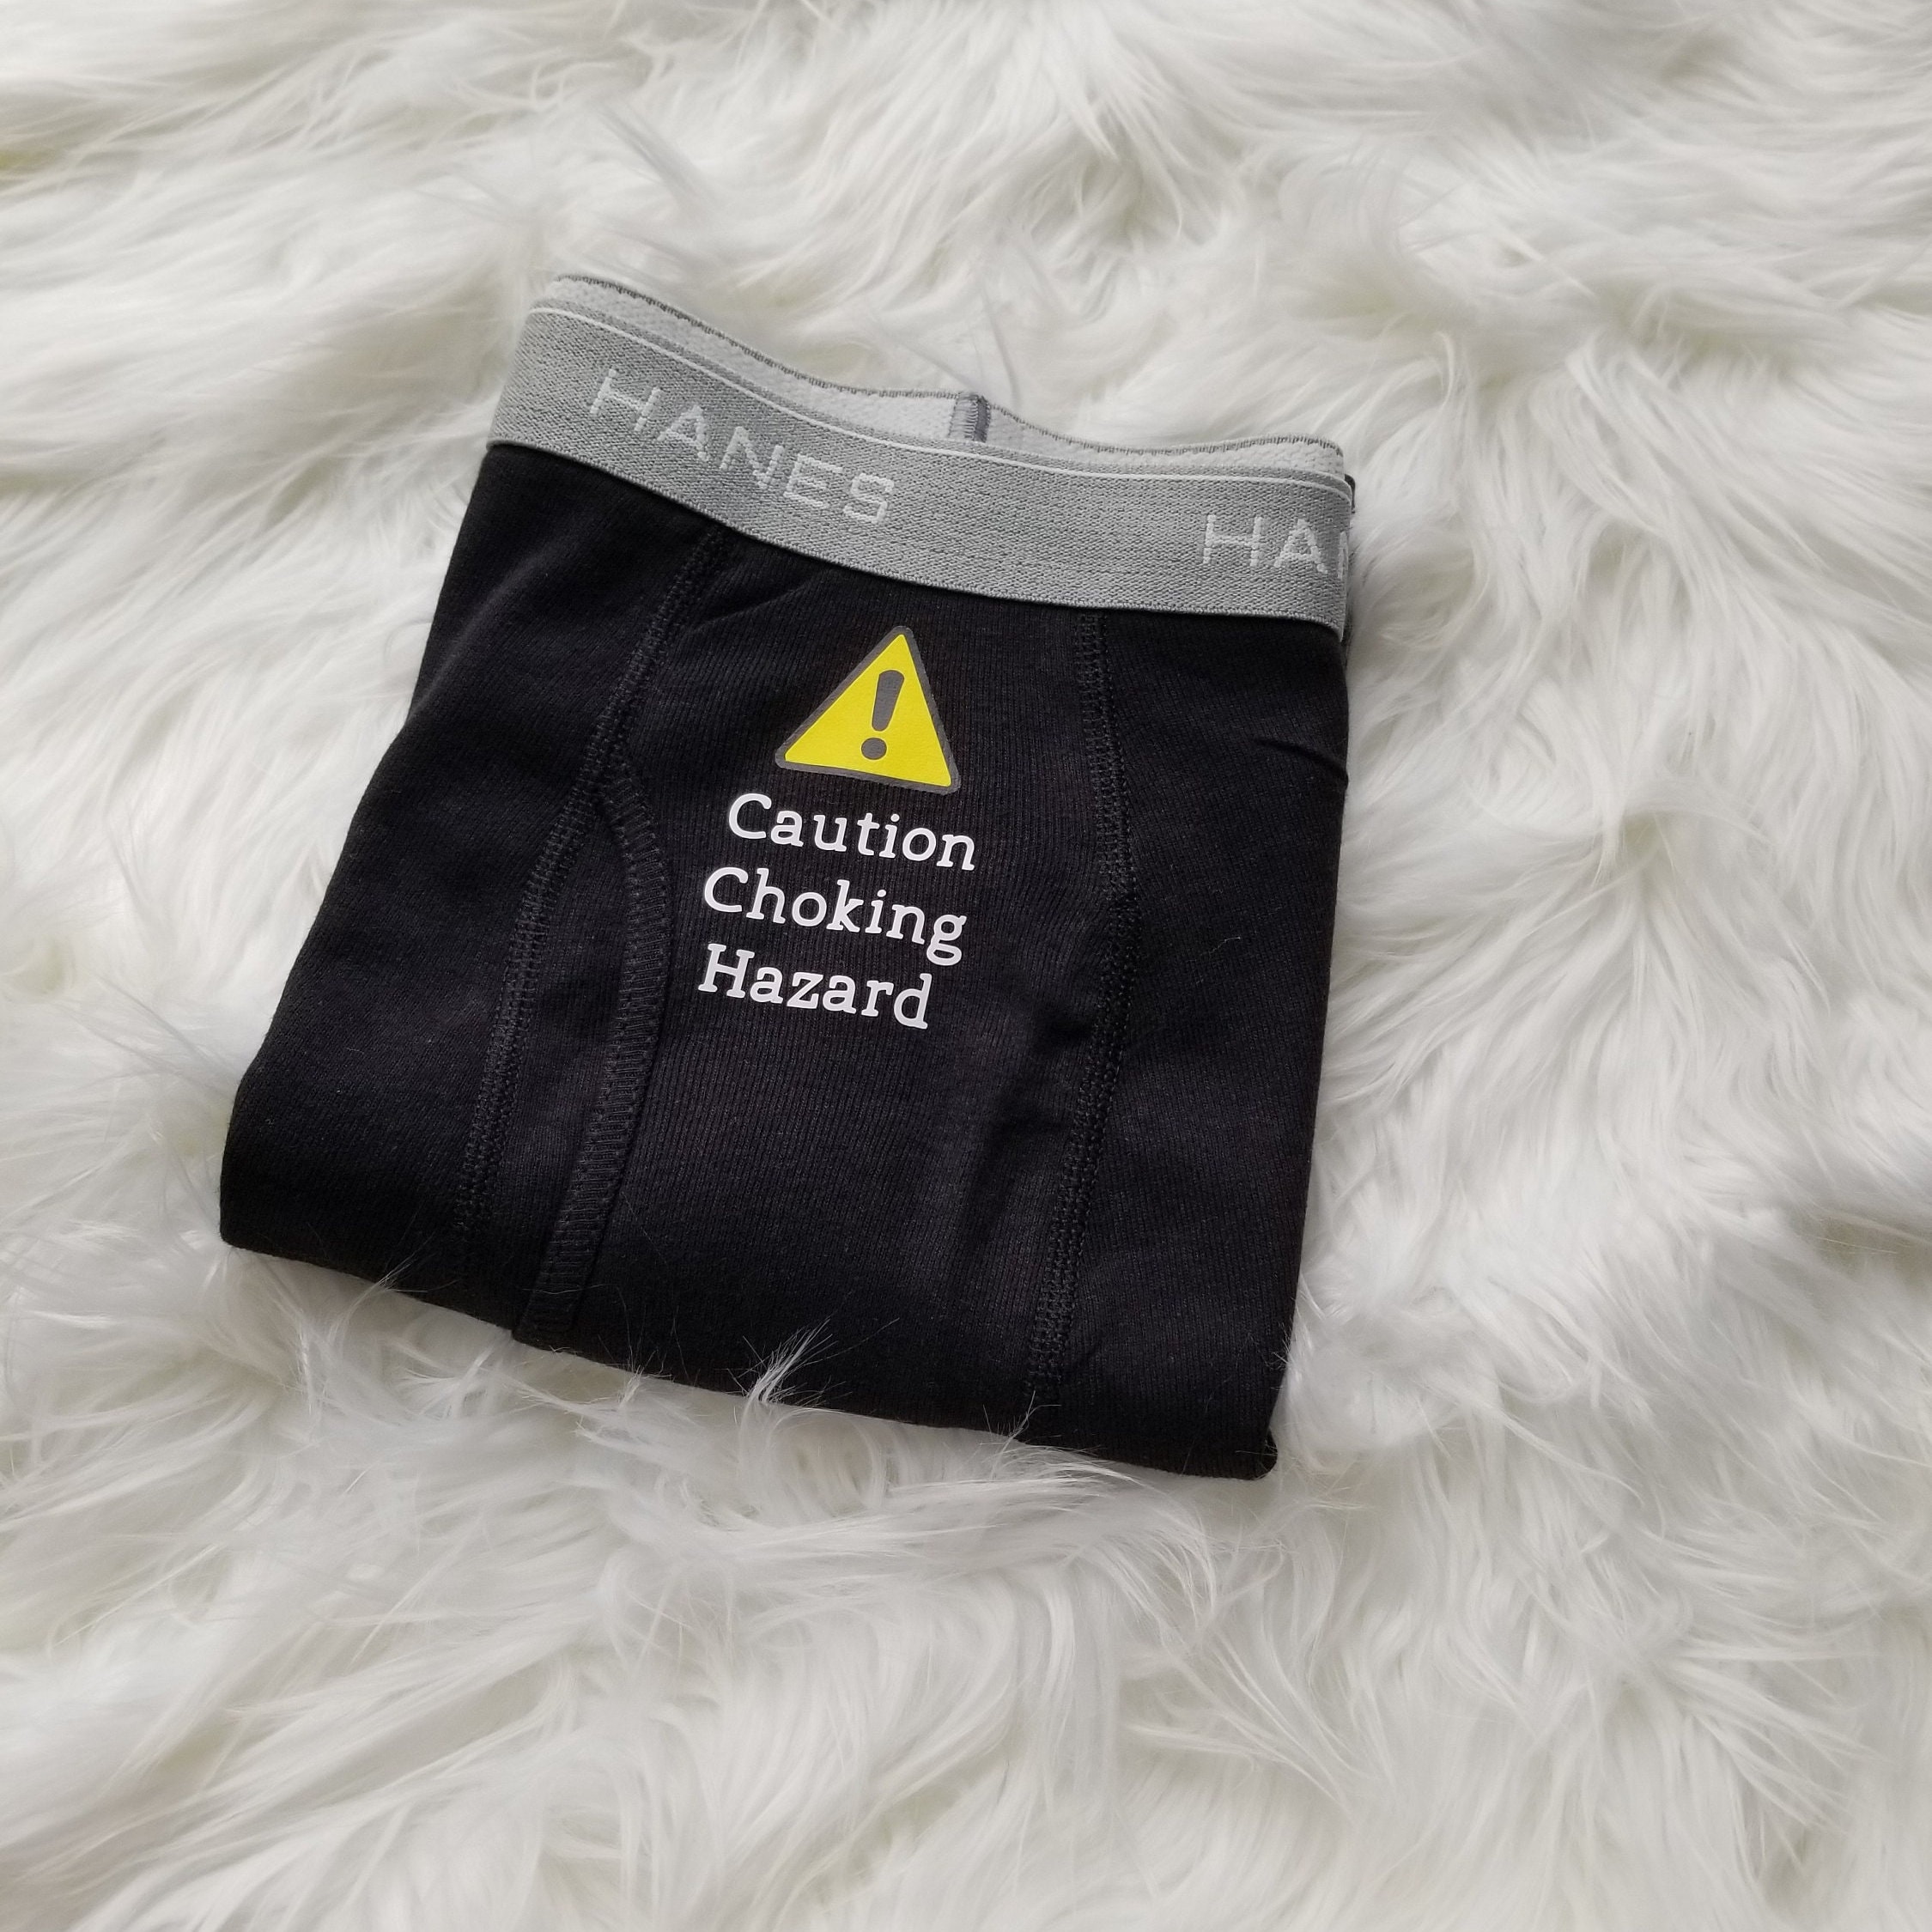 Matching Couples Underwear, Caution Slippery When Wet, Caution Choking  Hazard, His & Hers, Second Cotton Anniversary Gift, Novelty Gag Gift 